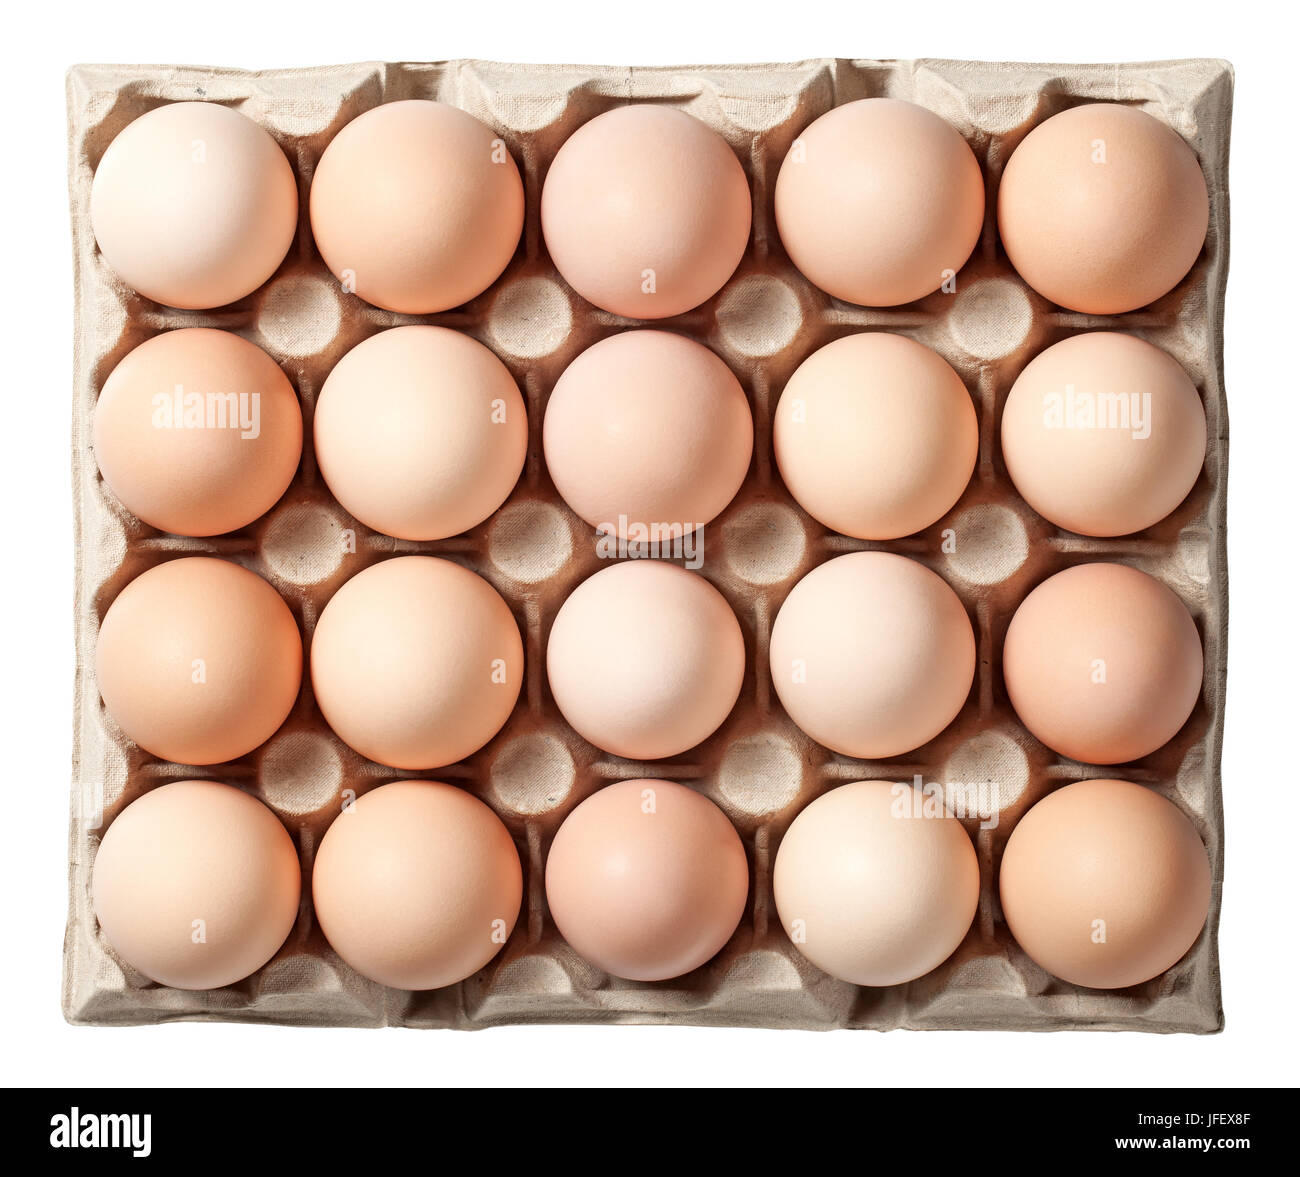 Chicken Eggs in Container Stock Photo